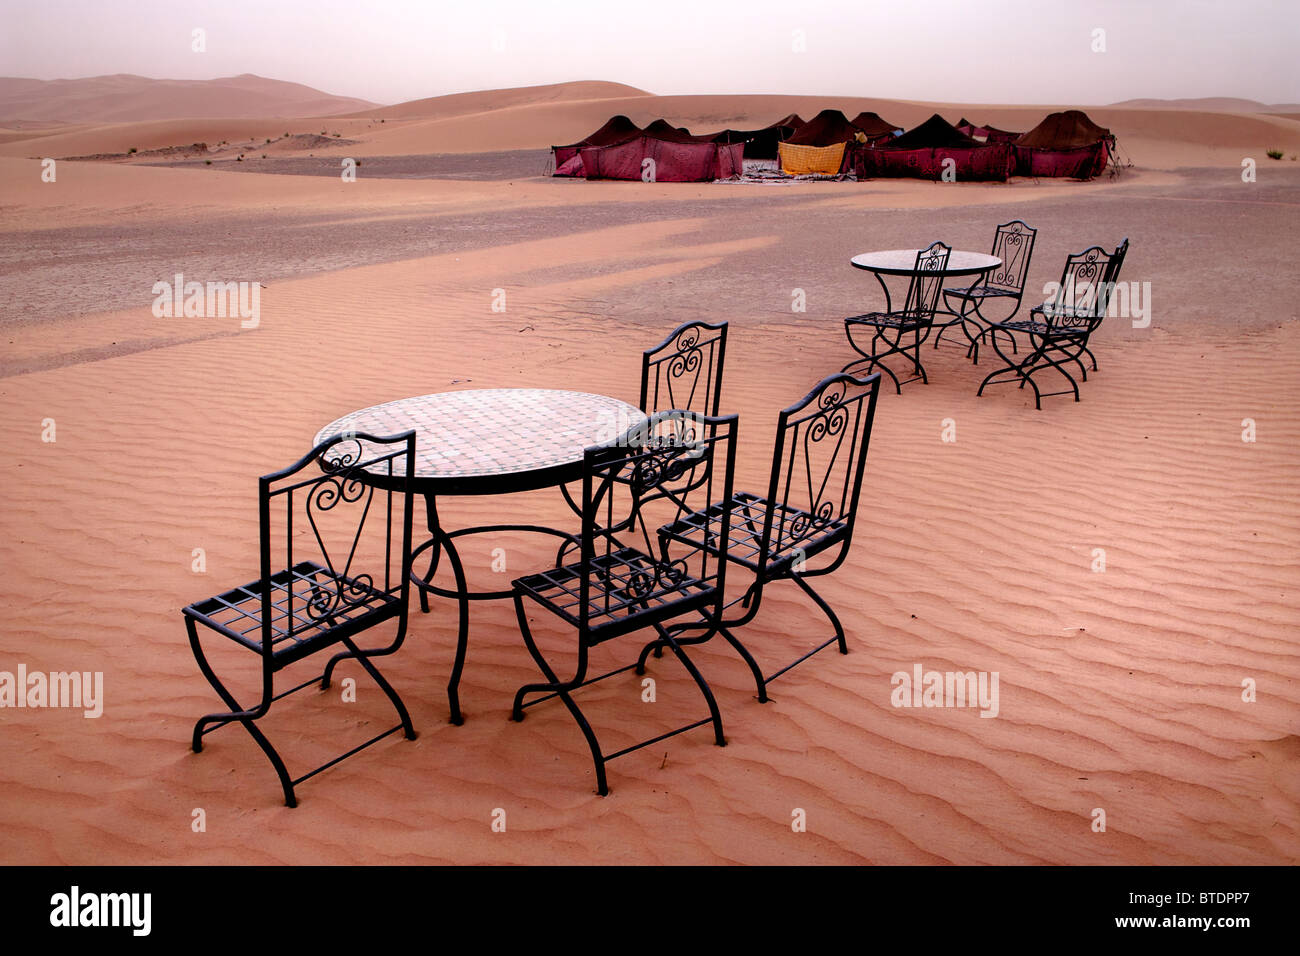 Two wrought iron patio tables with chairs at a rest stop in the Sahara, with traditional tents in the background Stock Photo